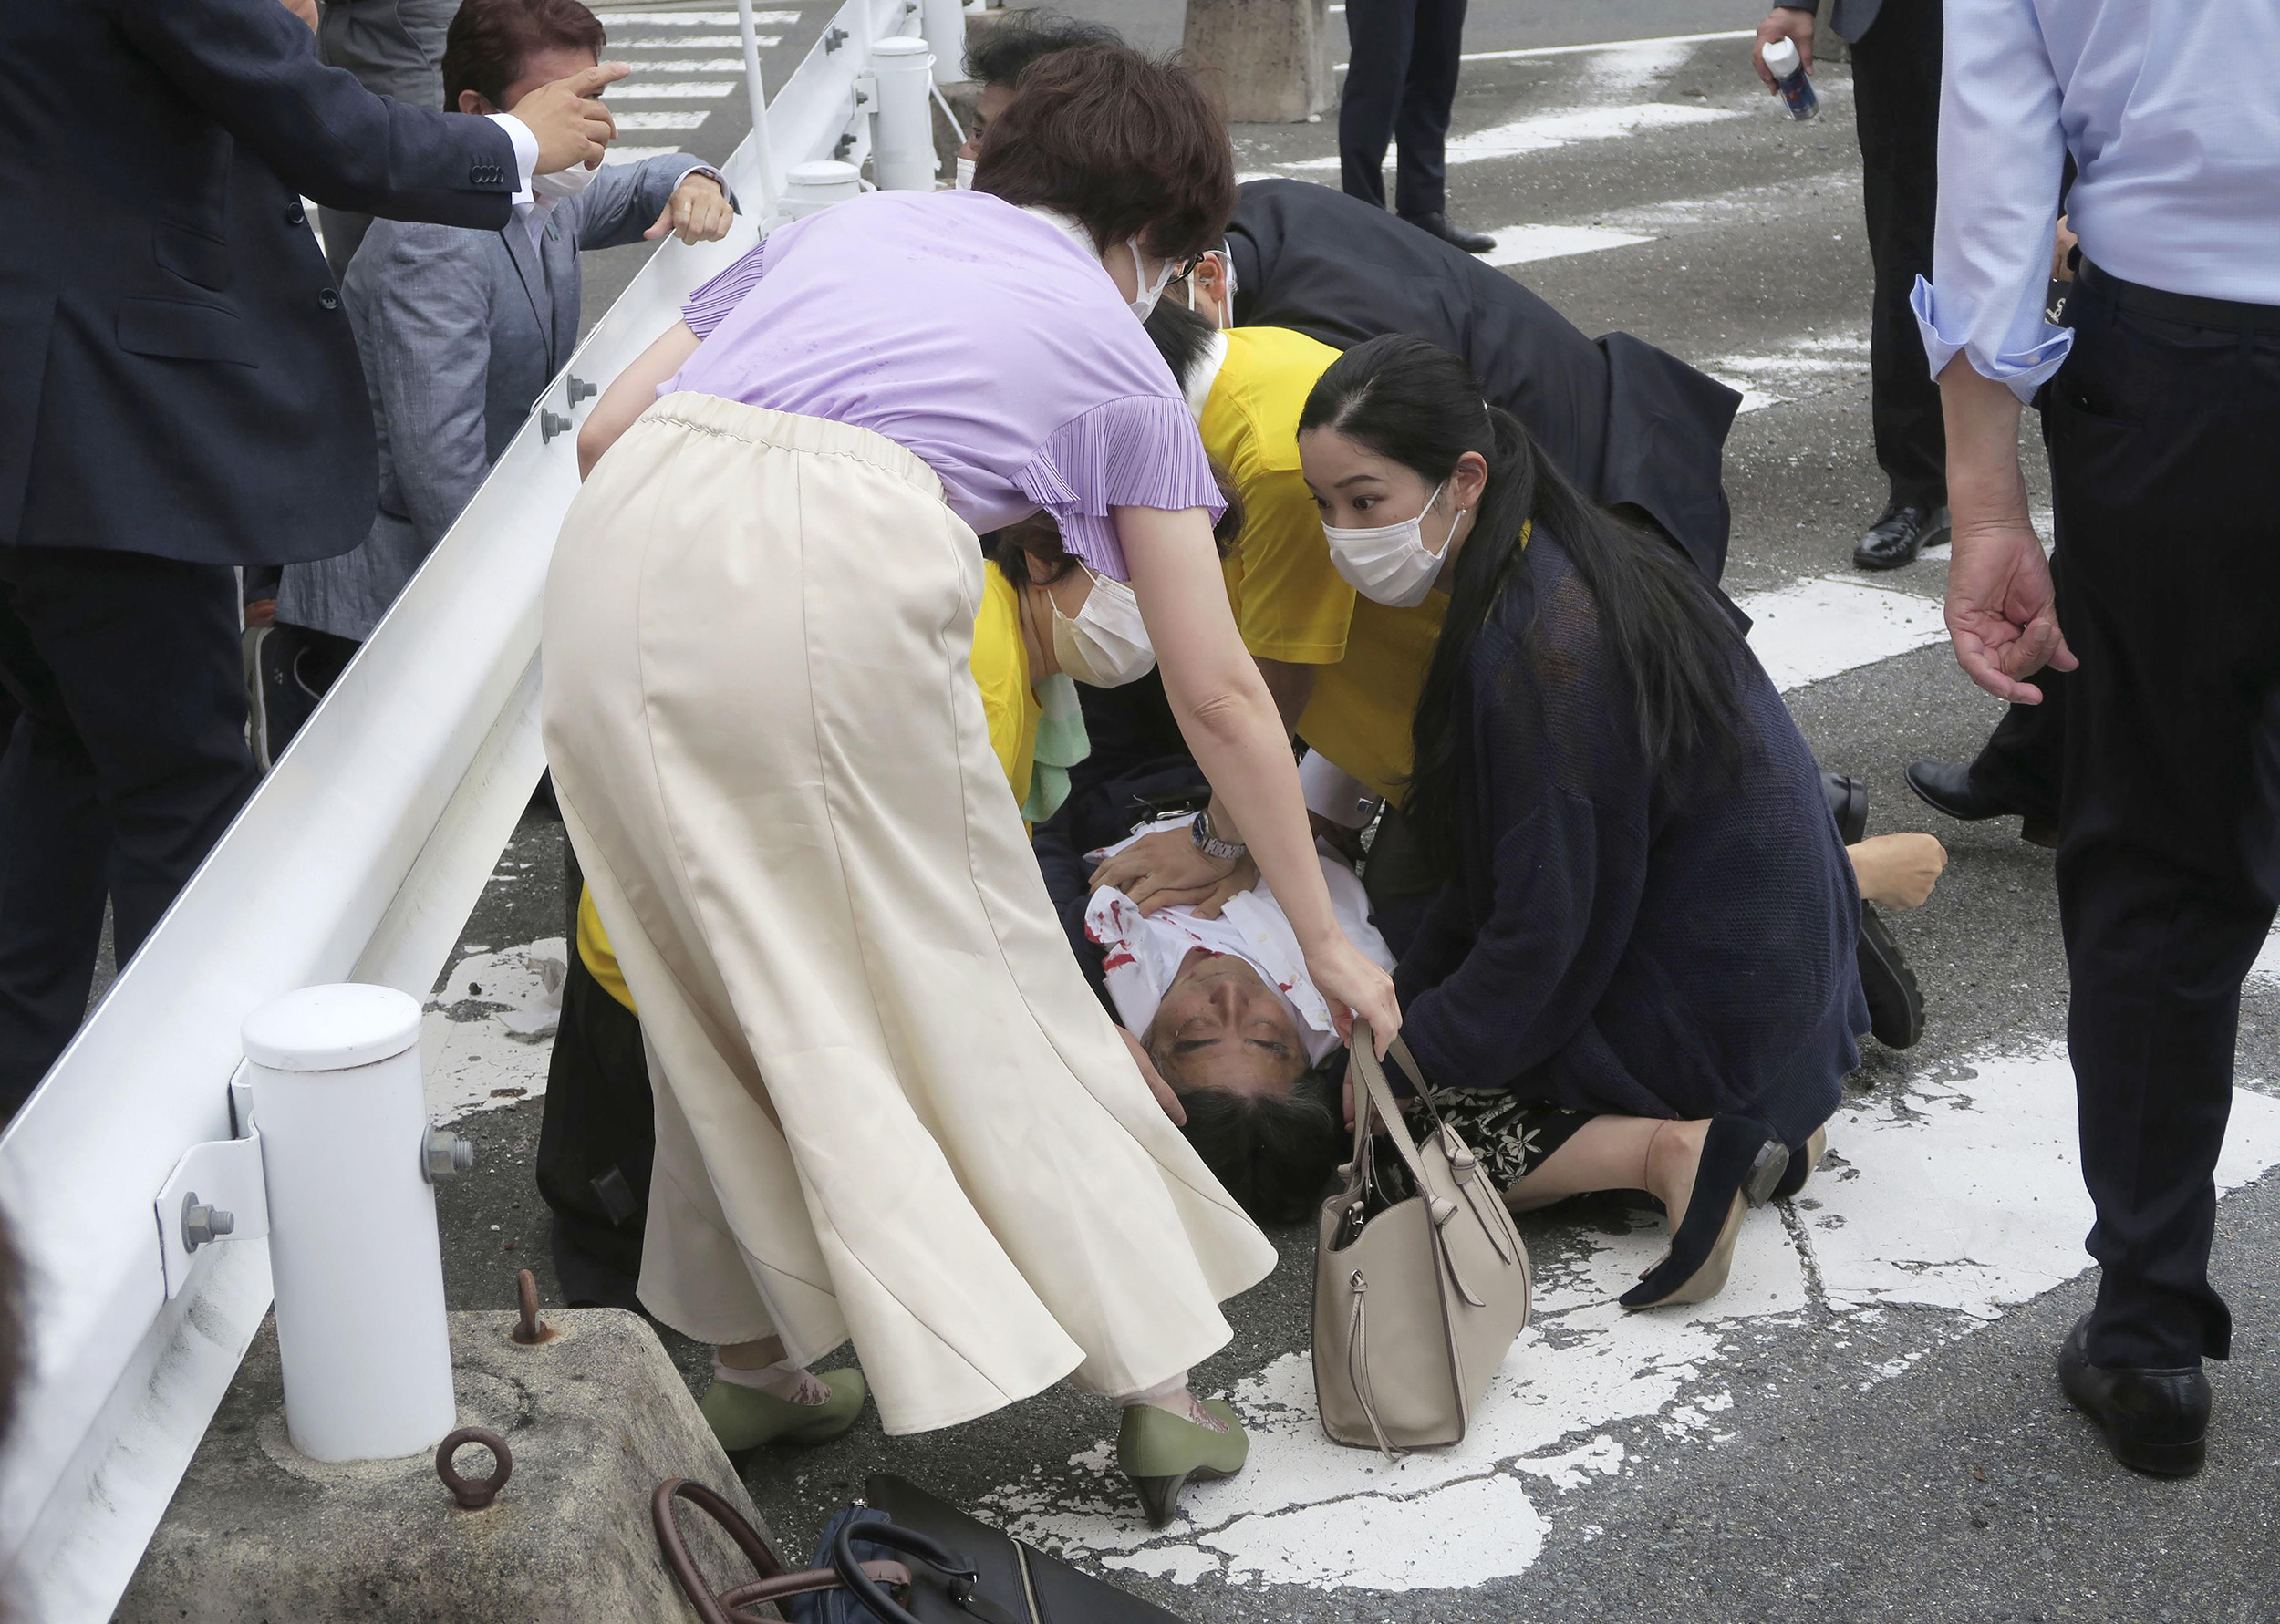 Japan's former Prime Minister Shinzo Abe, center, lies on the ground having been shot in Nara, Japan, on July 8.